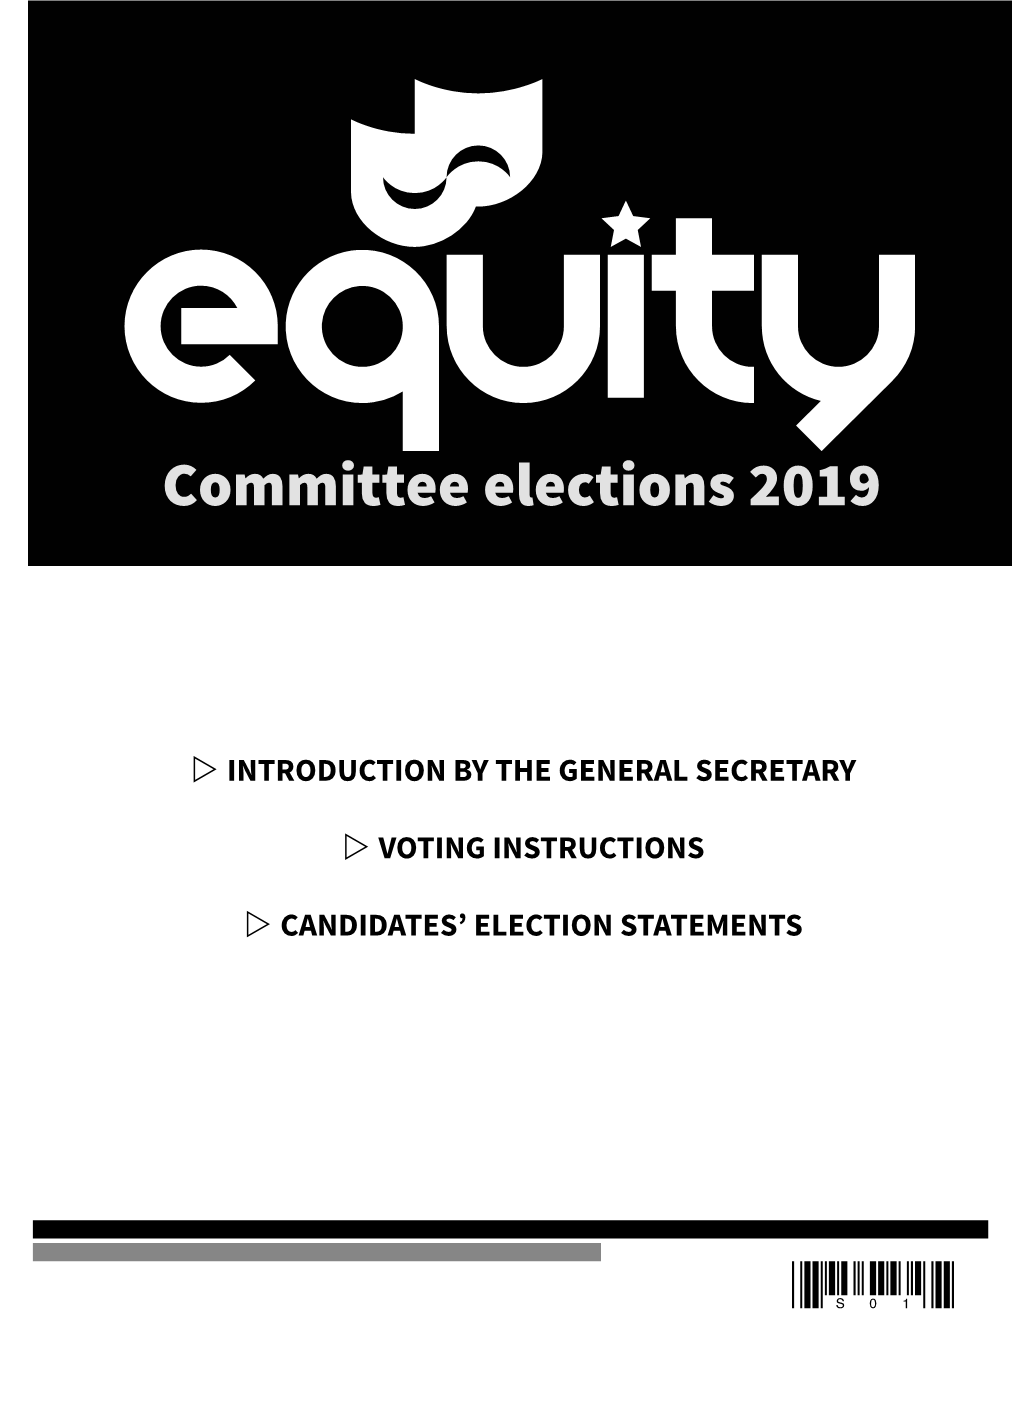 Committee Elections 2019